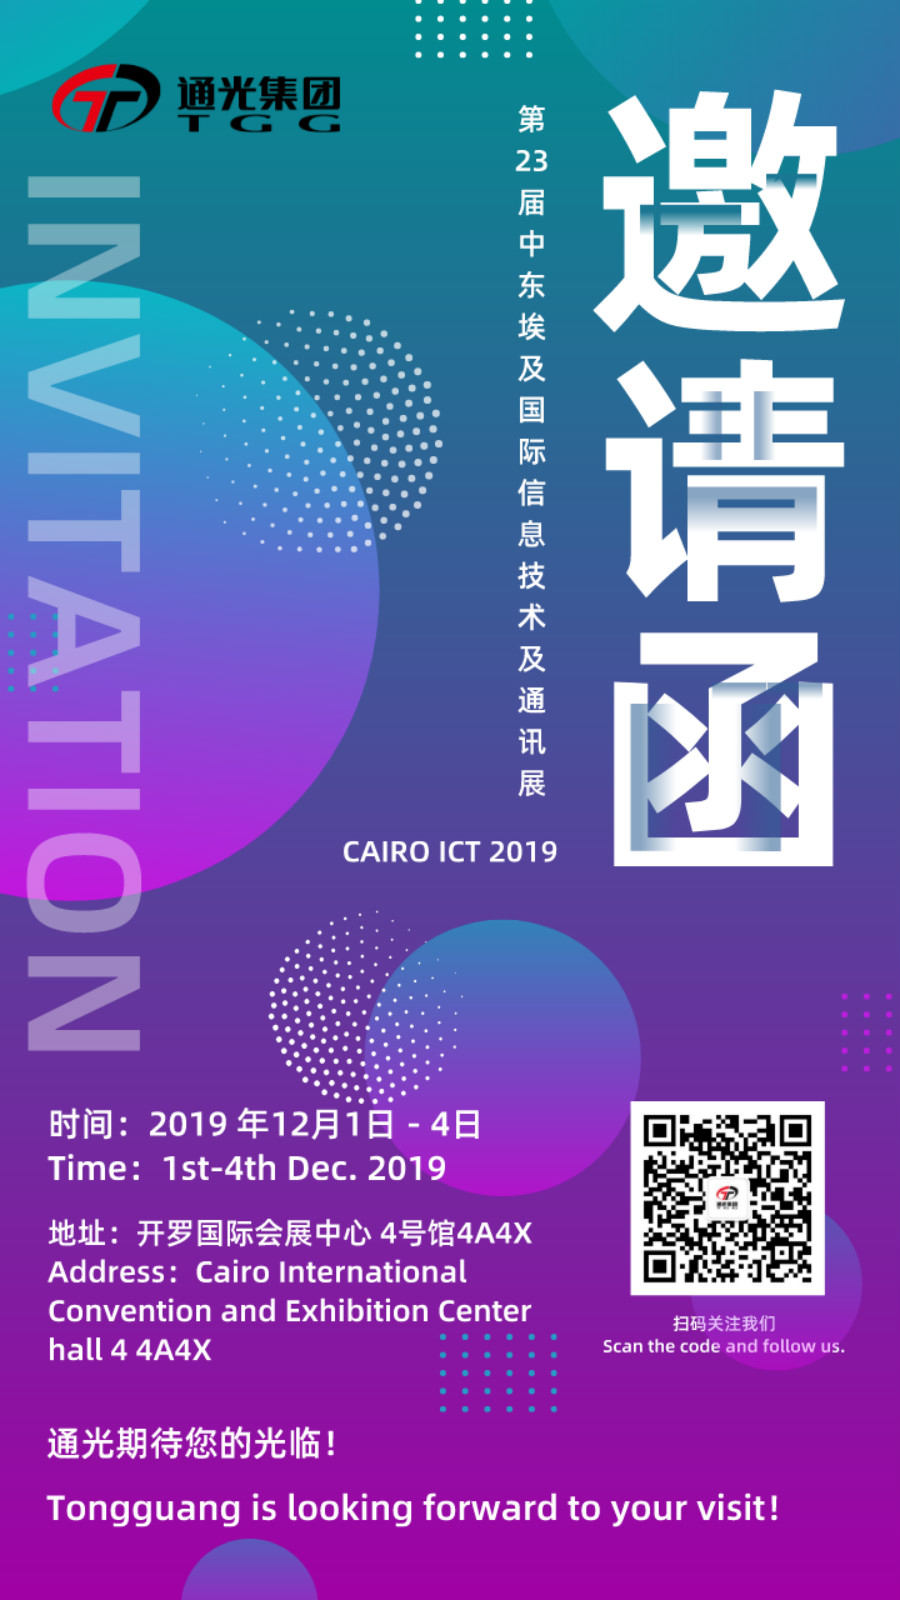 Preview | Tongguang meets with you in CAIRO ICT 2019